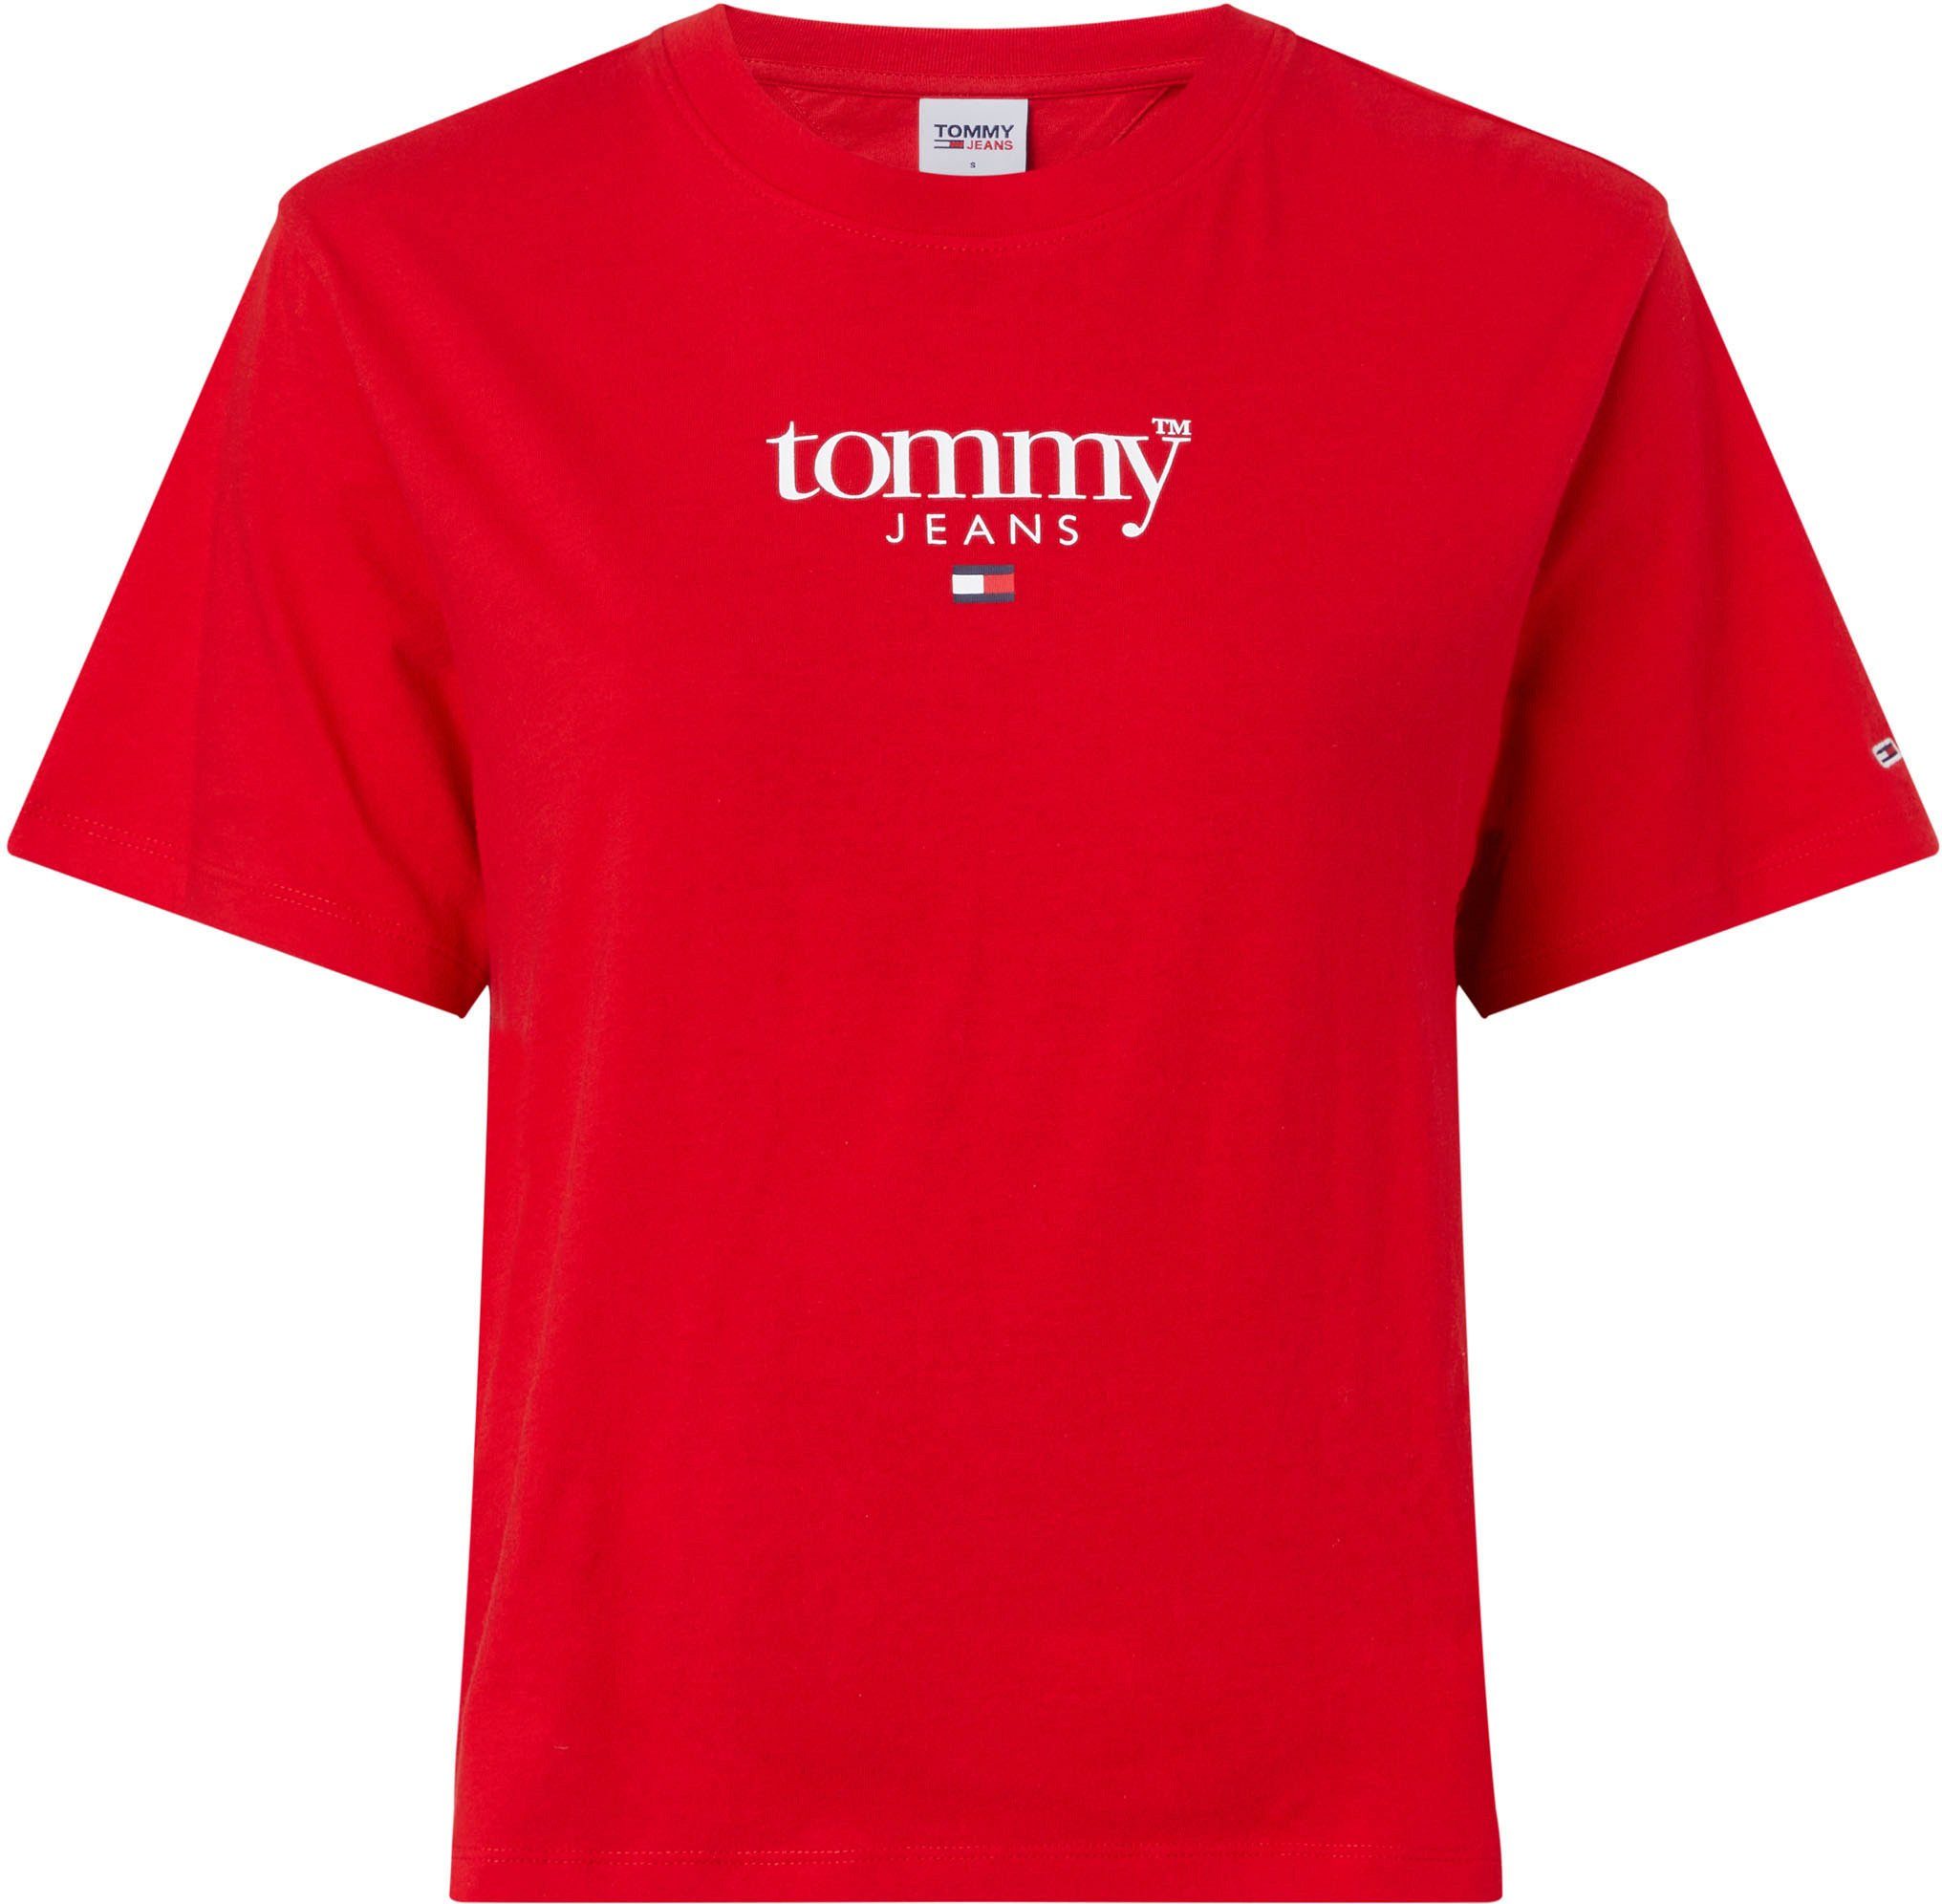 TJW Kurzarmshirt 1 ESSENTIAL LOGO Tommy Jeans SS hellrot Tommy mit Jeans gestickter Logo-Flag CLASSIC